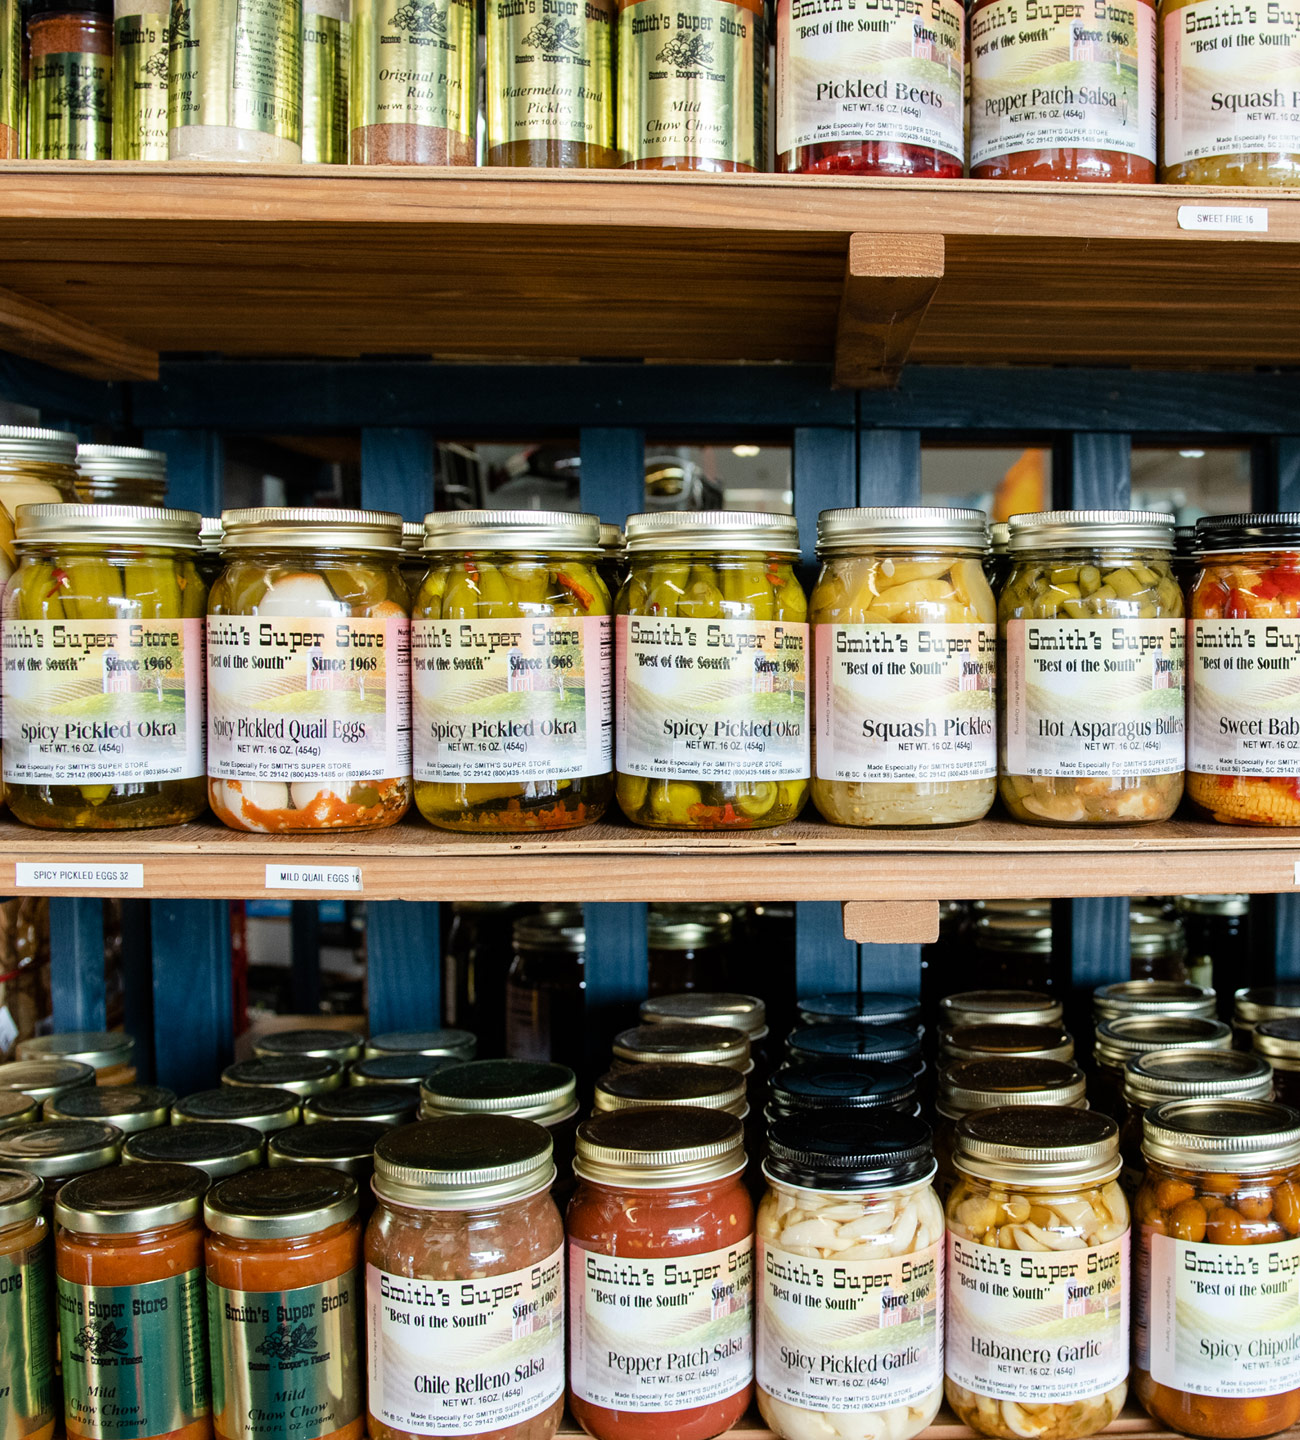 jars of Smith's Super store pickled okra, pickled beets, salsa, chow chow and more